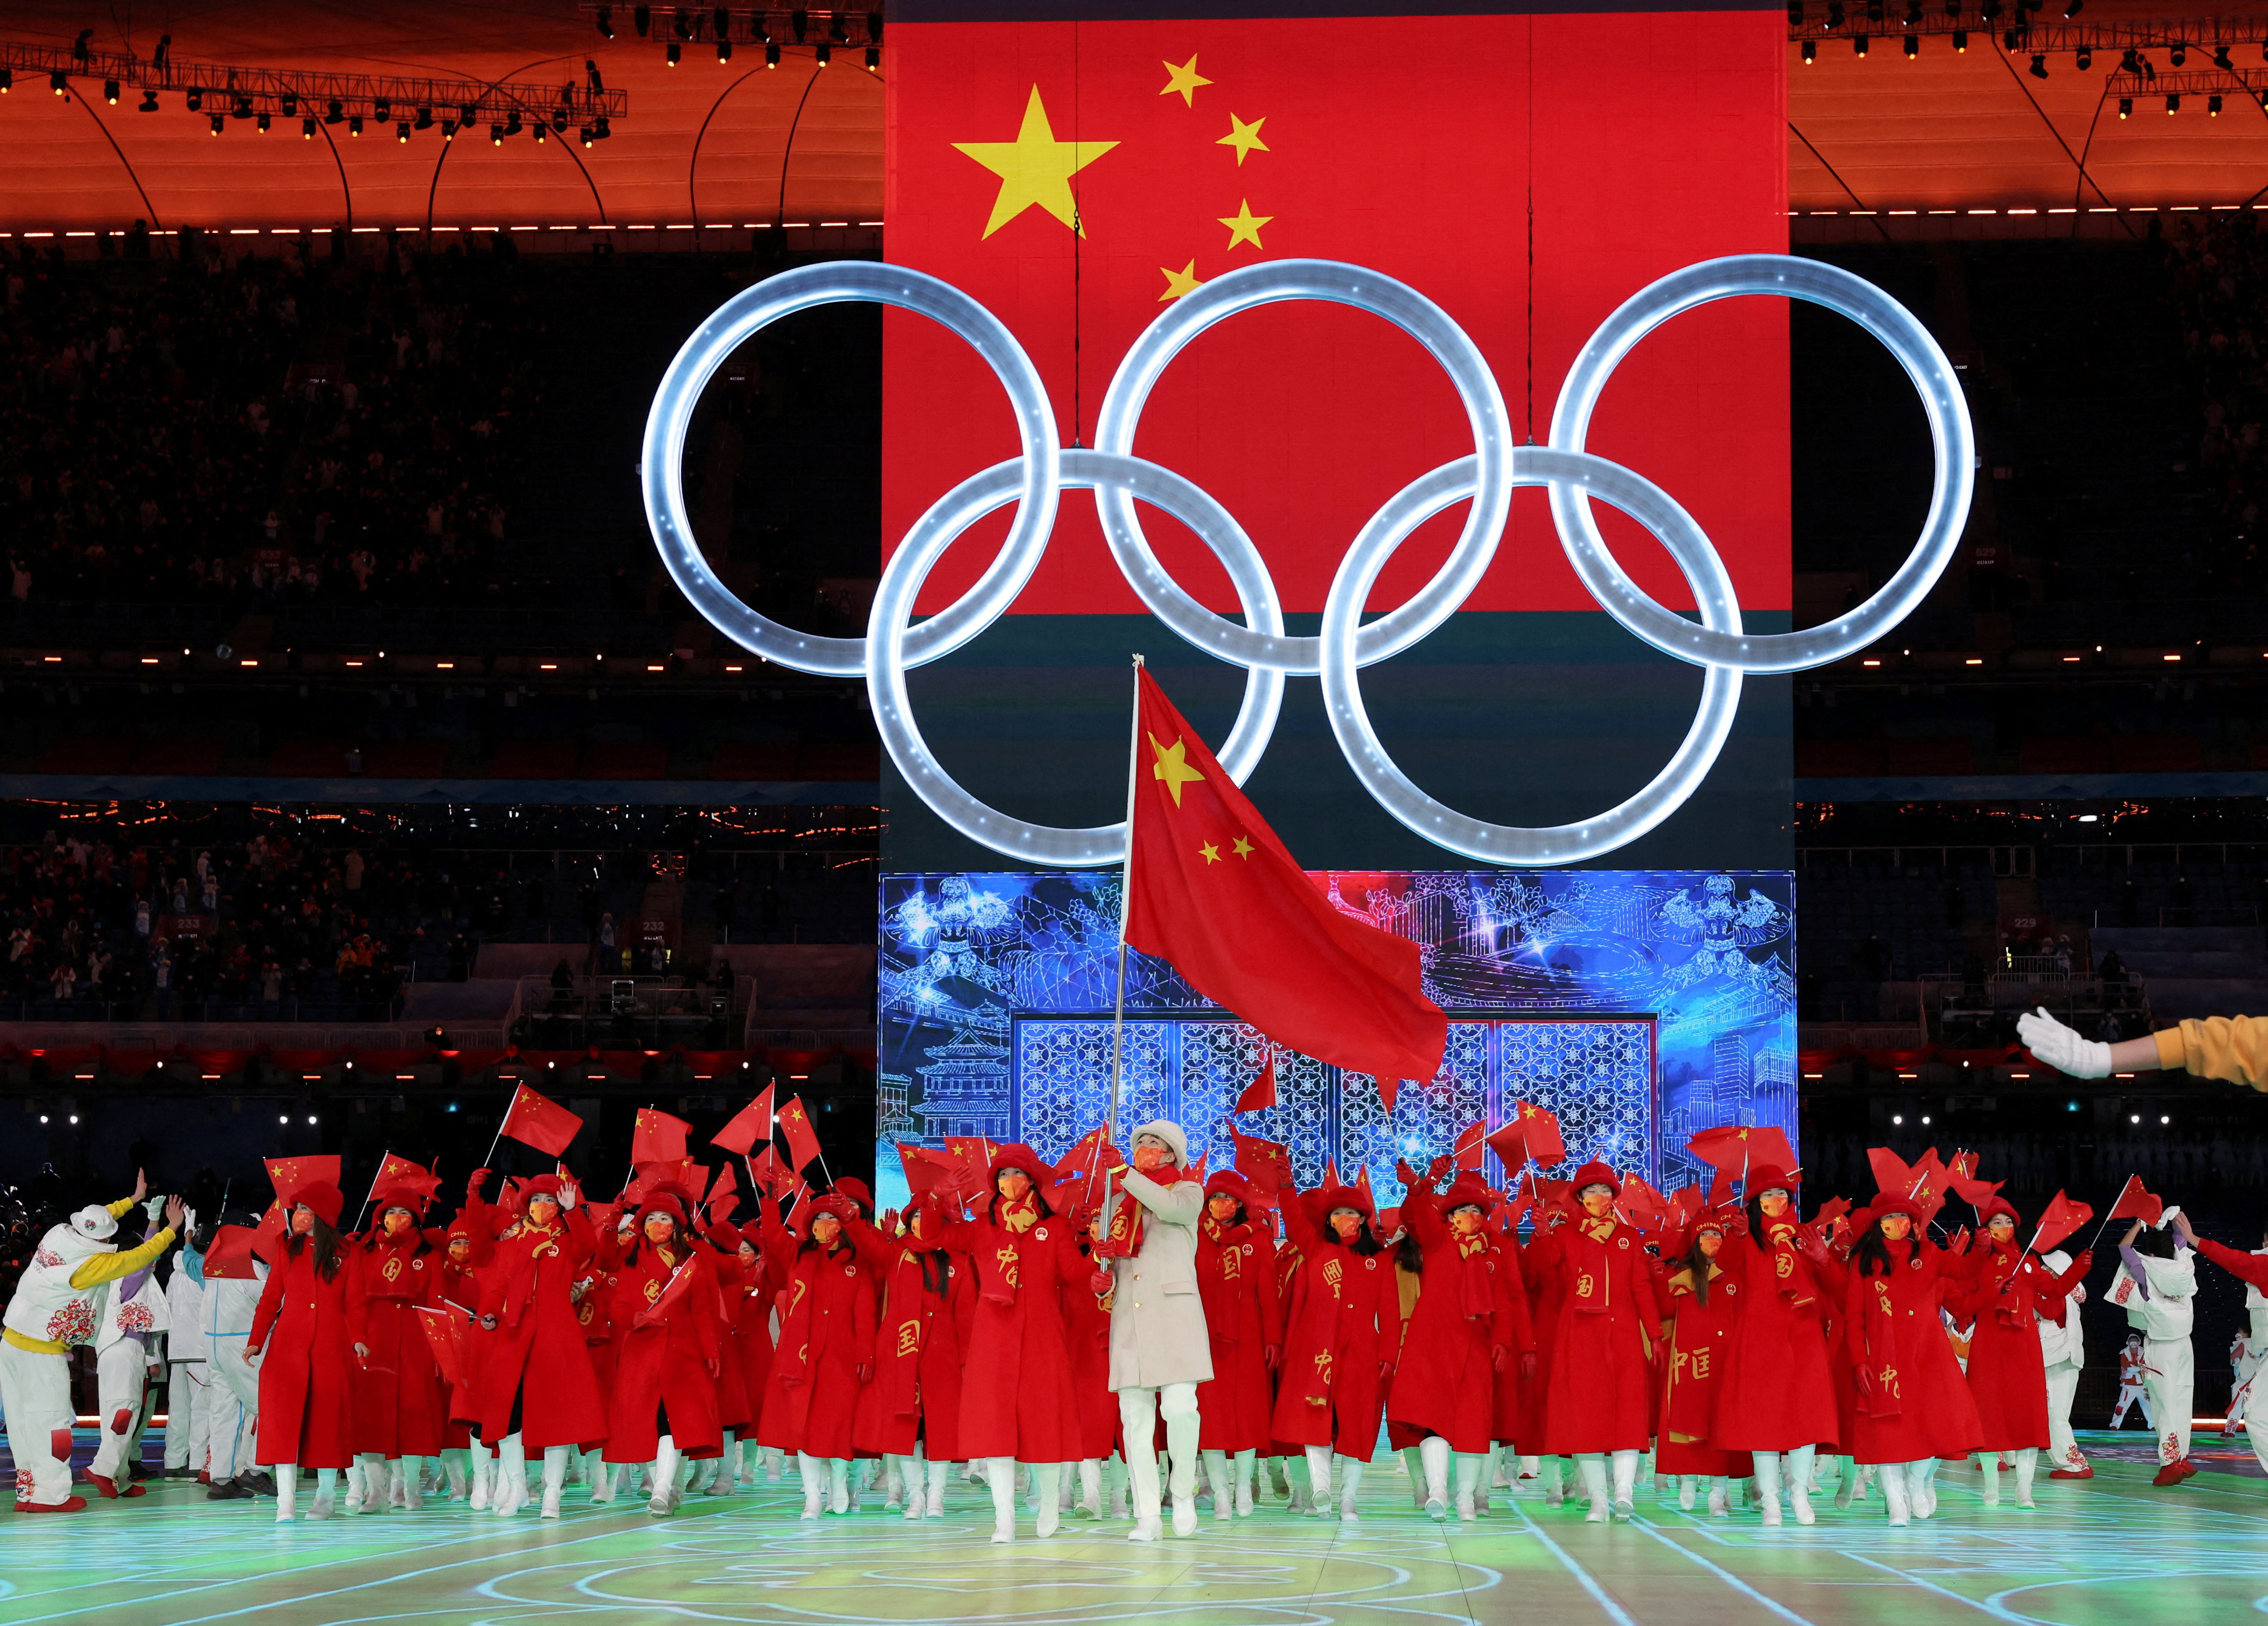 Olympics “even more muted than Tokyo”: “The Guardian” criticizes Beijing 2022′s politicization